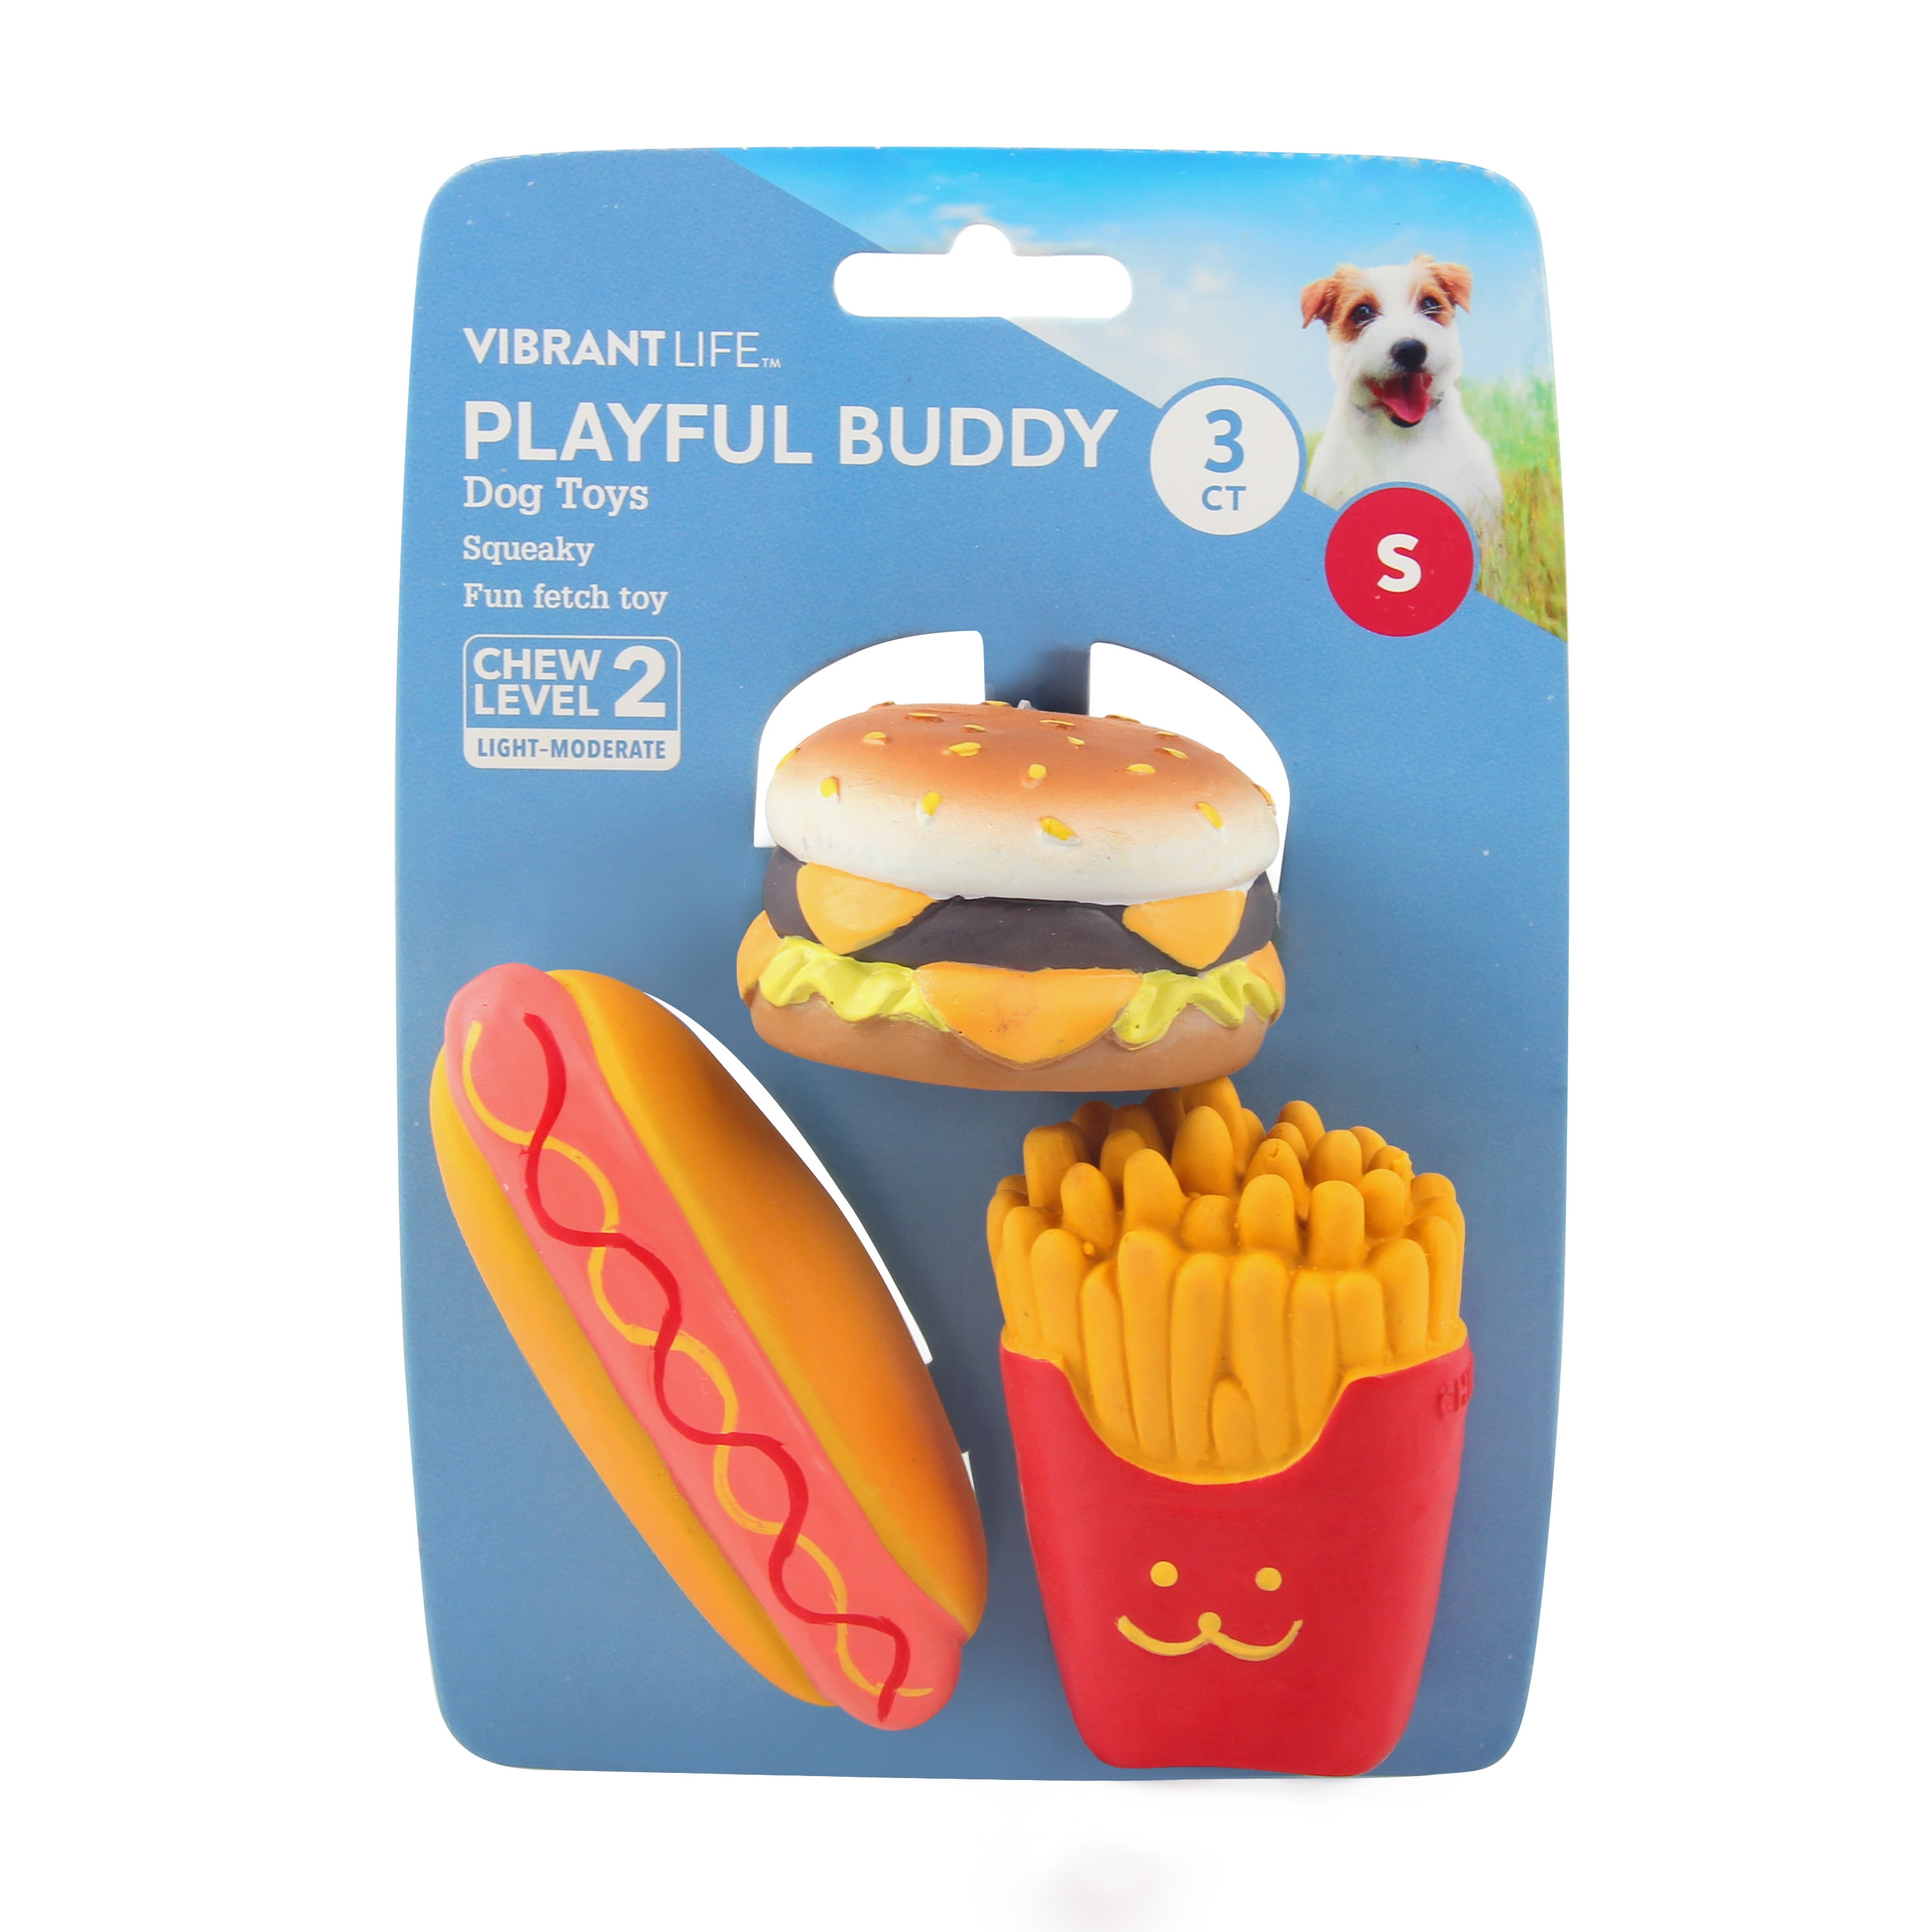 Vibrant Life Playful Buddy Dog Toys, Junk Food, Small, 3 Count 